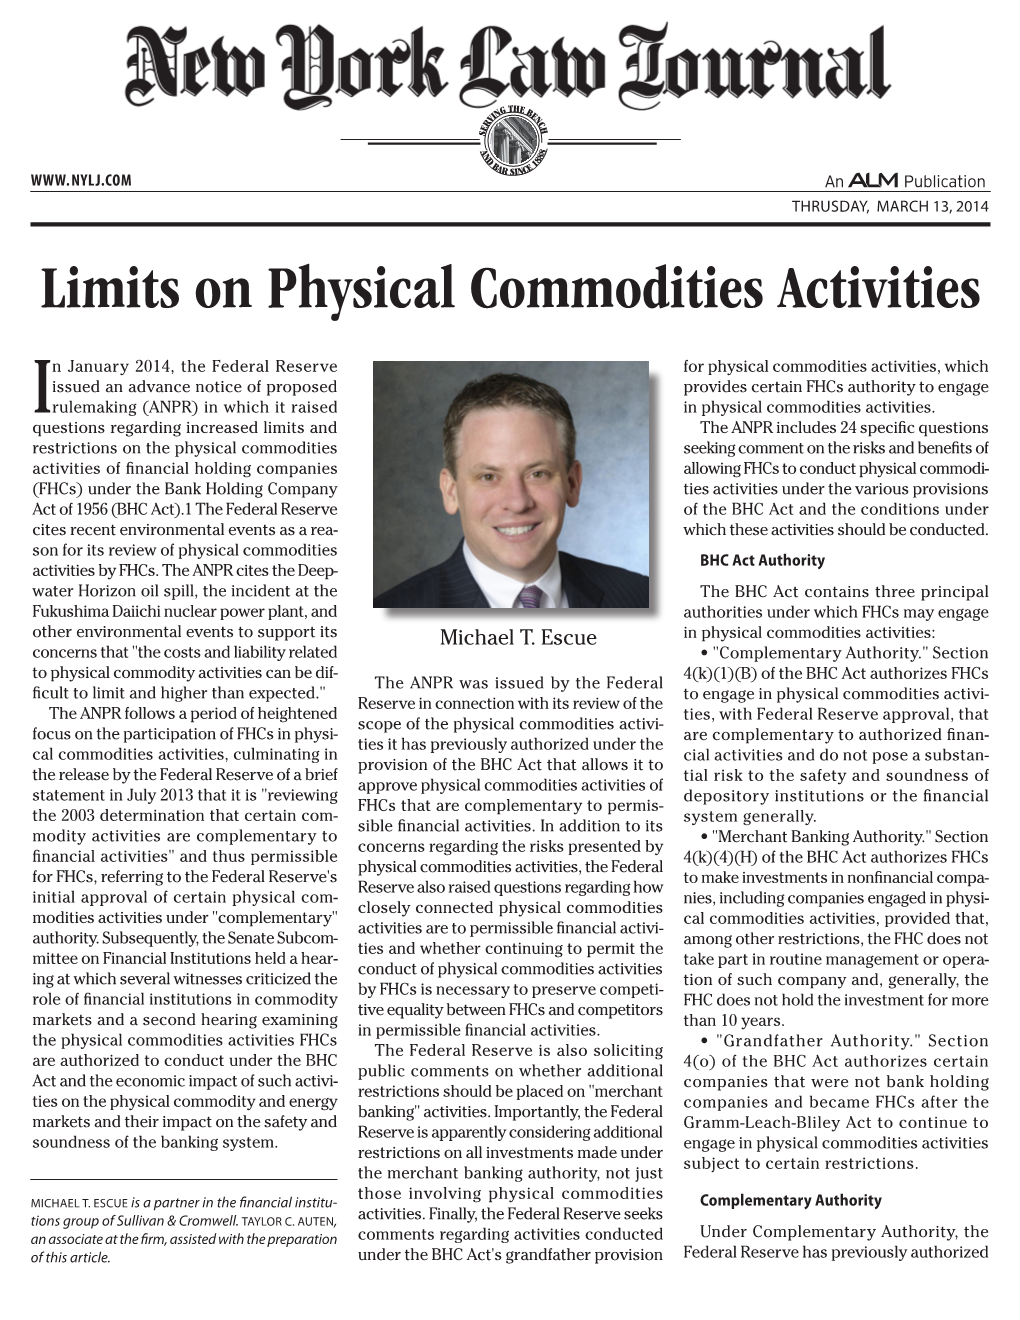 Limits on Physical Commodities Activities